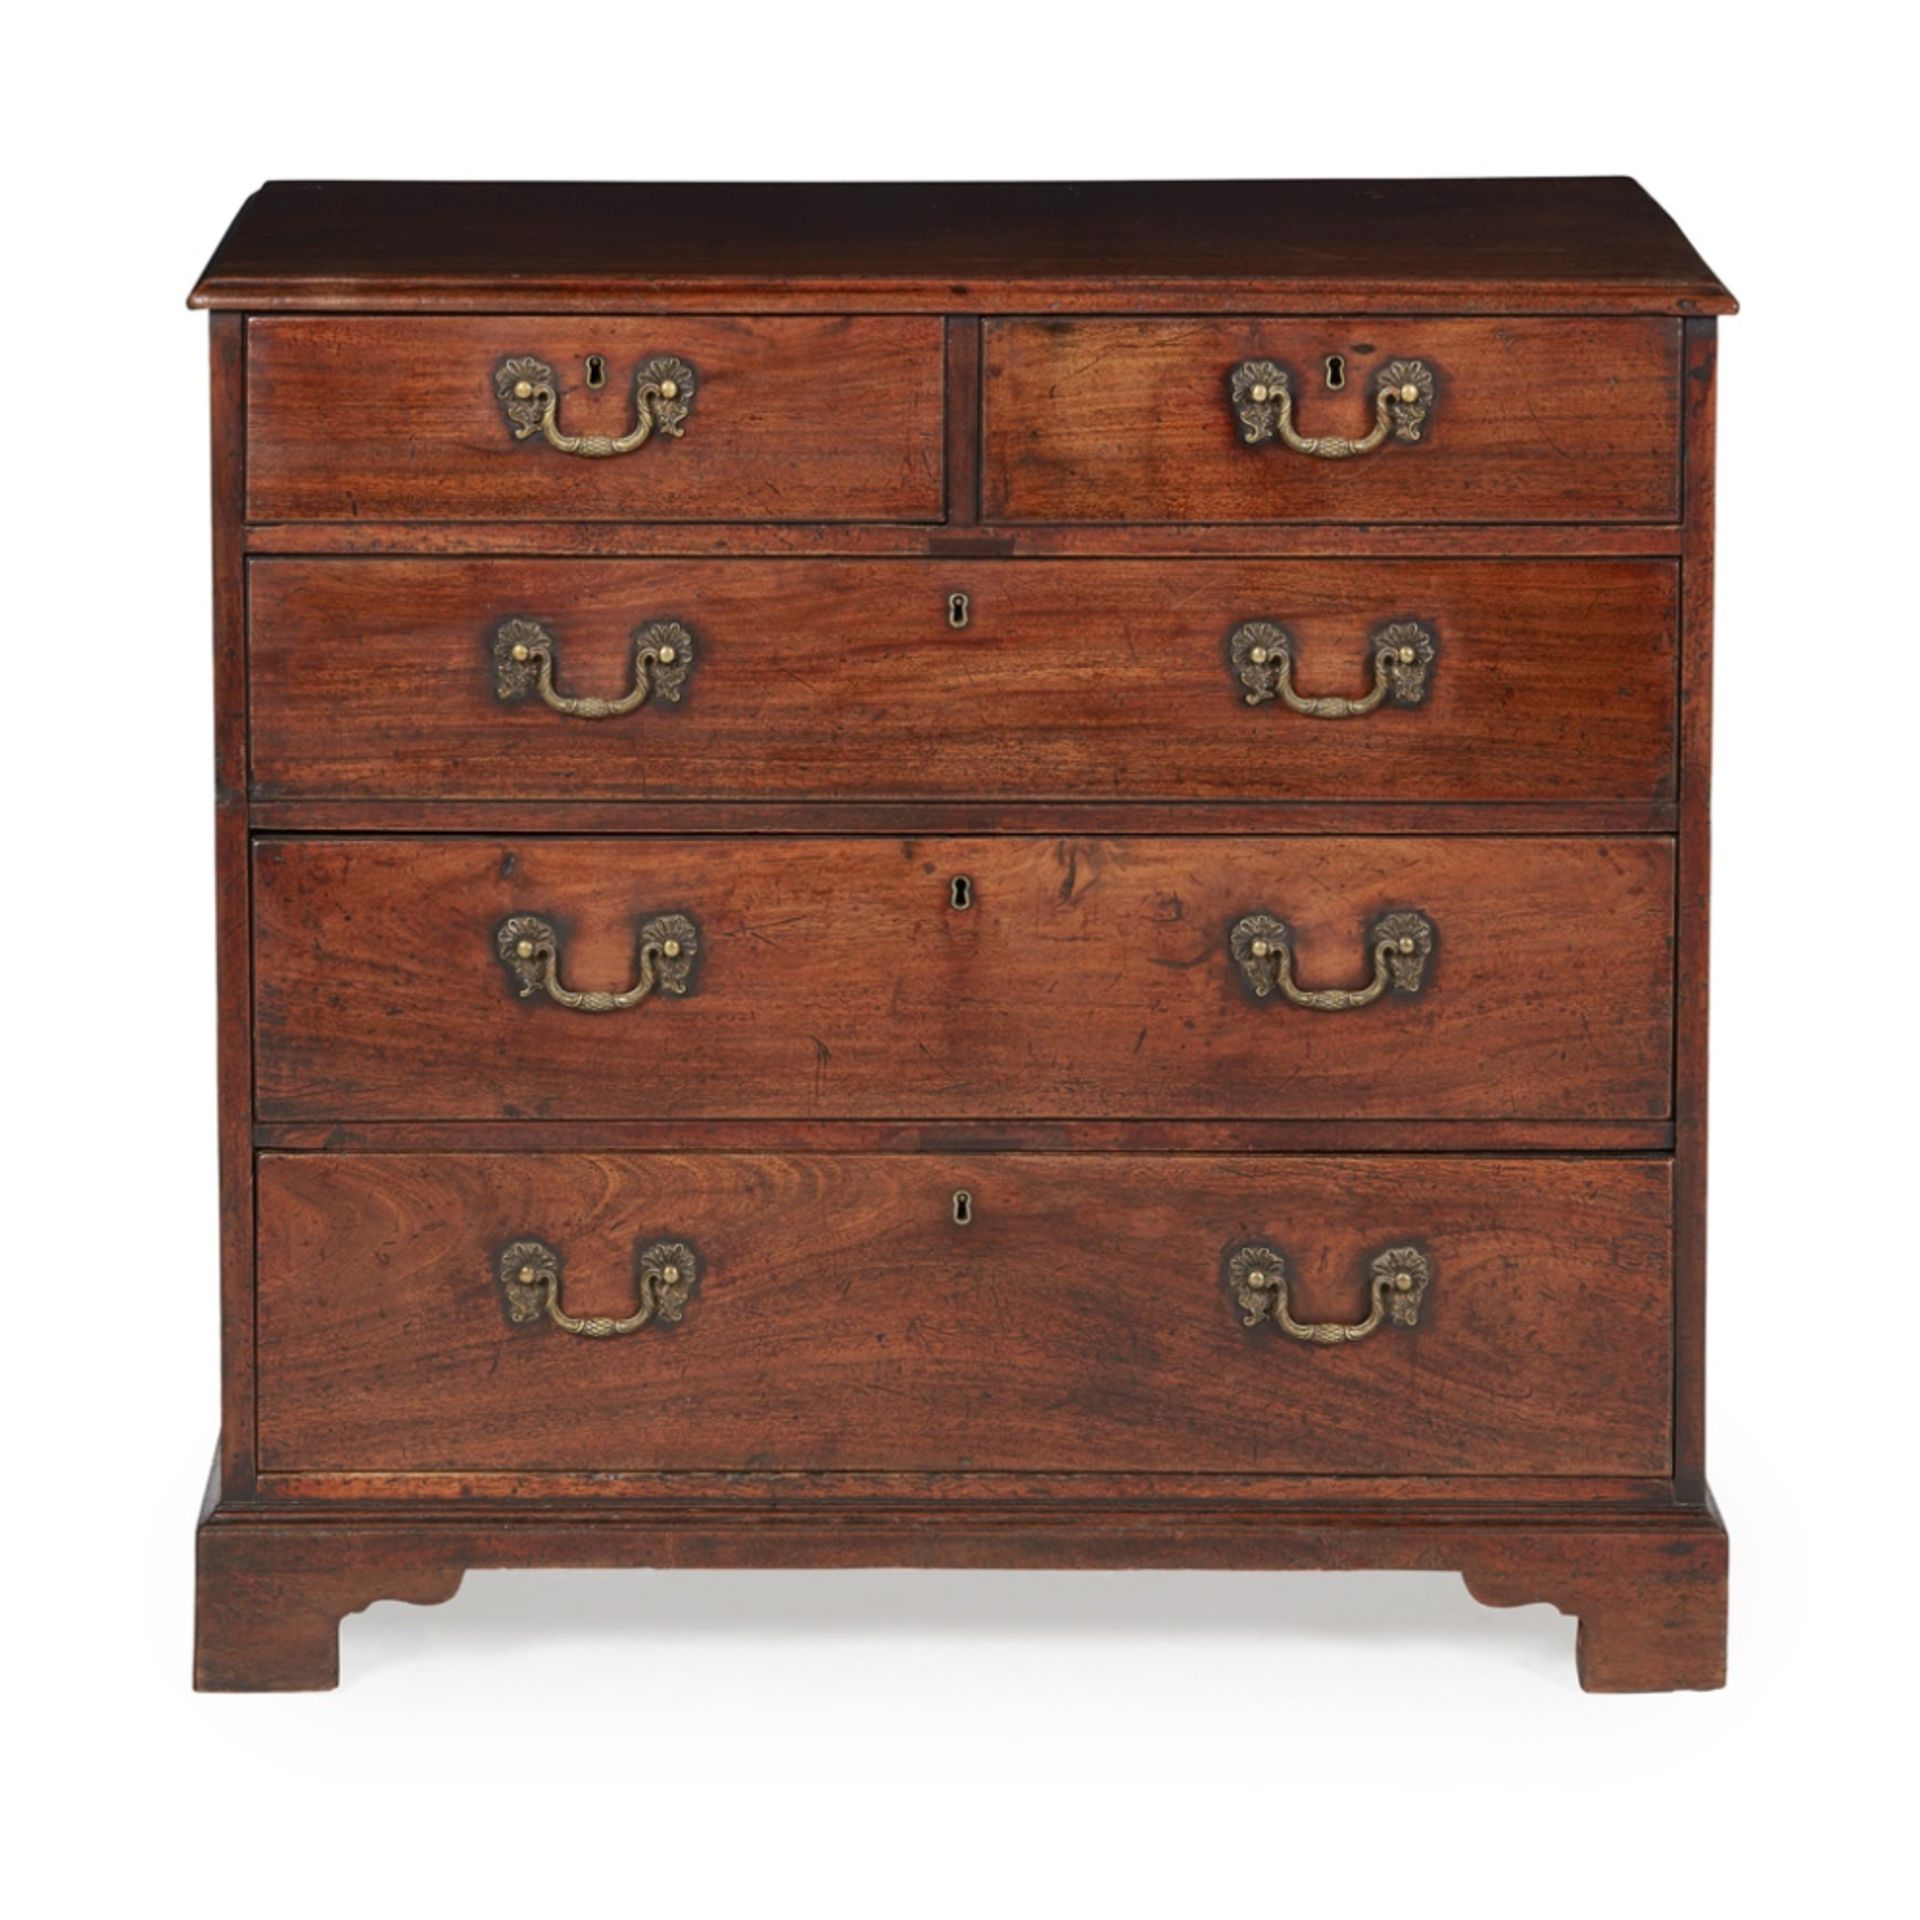 GEORGE III MAHOGANY 'CHIPPENDALE' CHEST OF DRAWERSCIRCA 1770 the moulded rectangular top above two